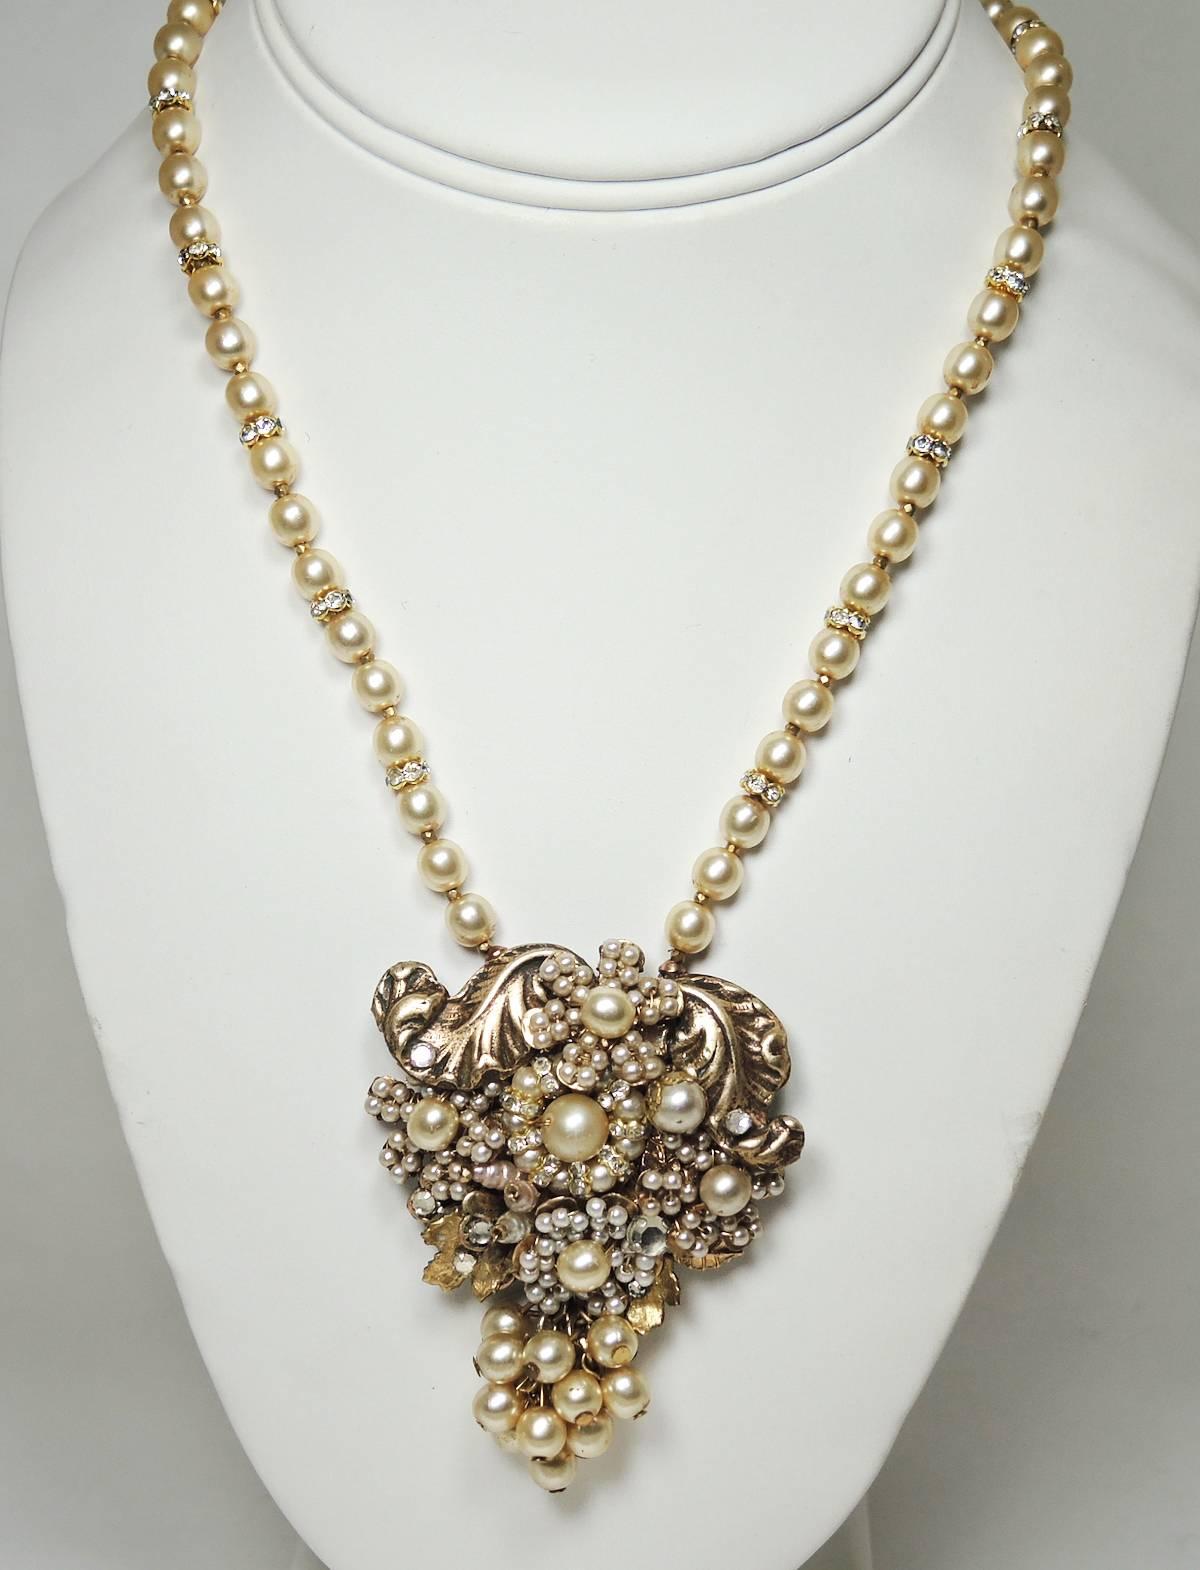 Here is a beautiful, all original, vintage necklace by Miriam Haskell that is artfully crafted with a large ornate drop.  It is embellished with lustrous faux pearls, rose montee stones and golden leaves. It has a cluster of faux pearls at the base